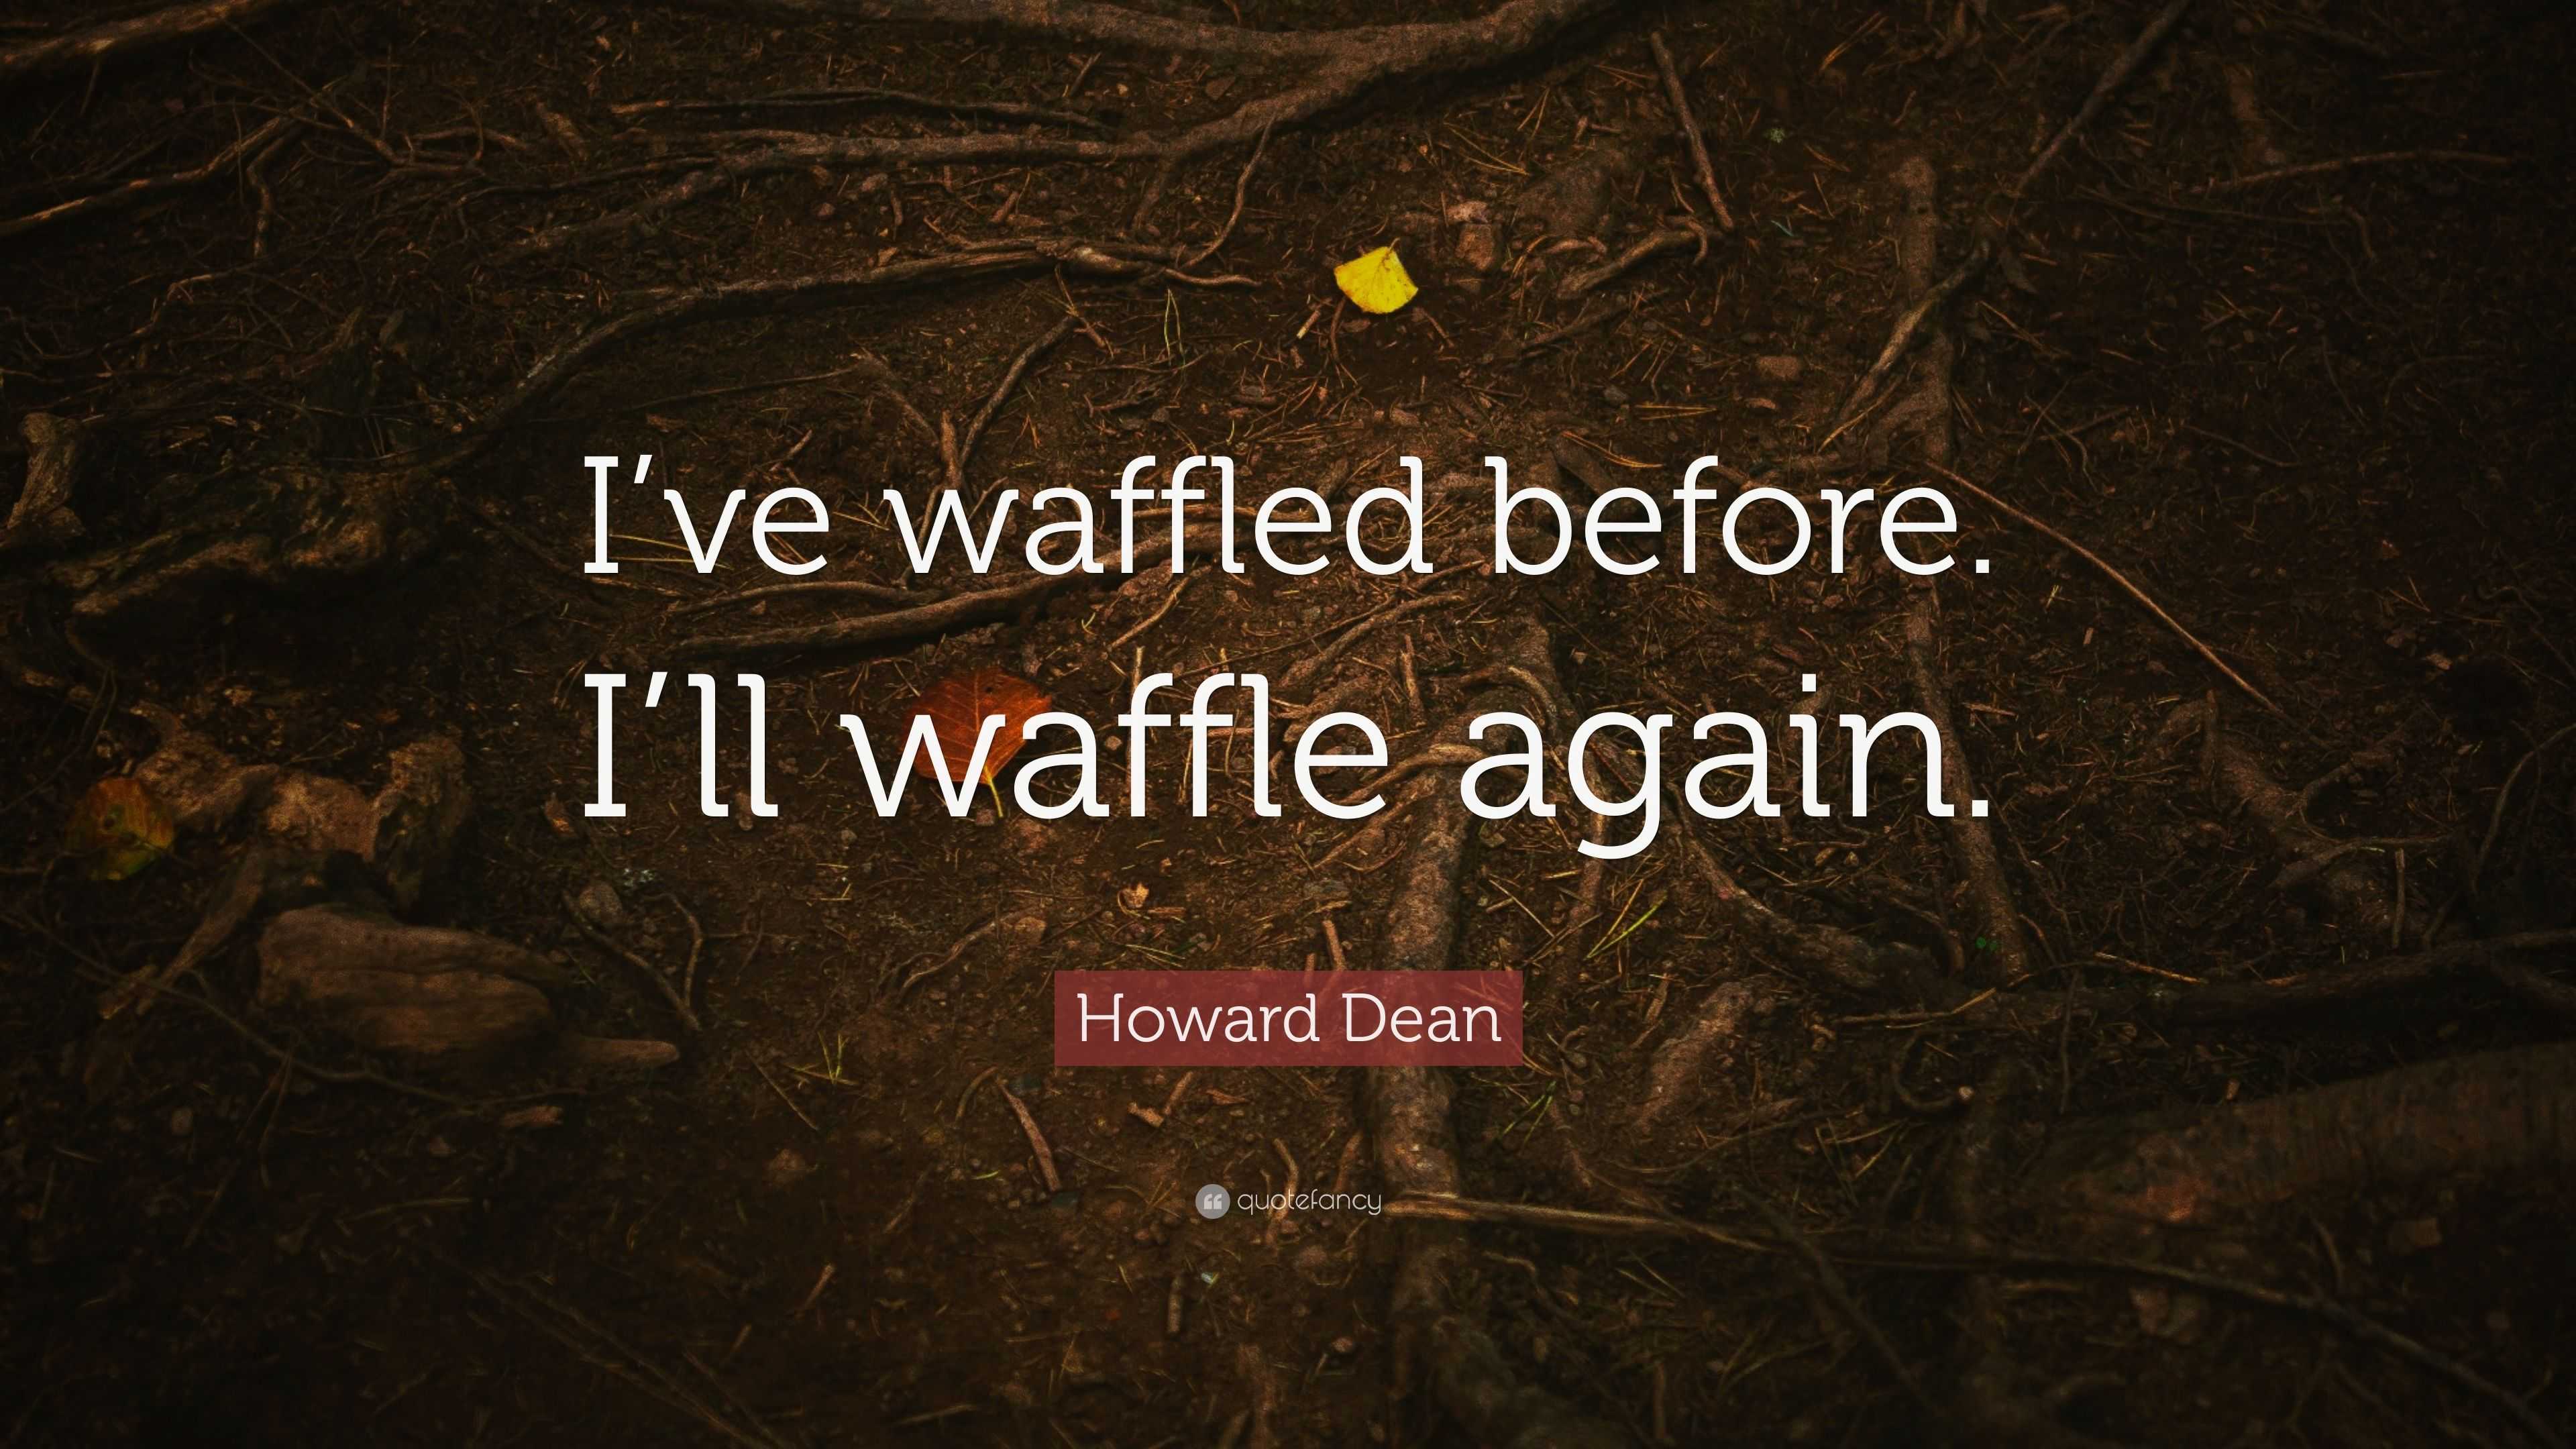 Howard Dean Quote: "I've waffled before. I'll waffle again." (9 wallpapers) - Quotefancy